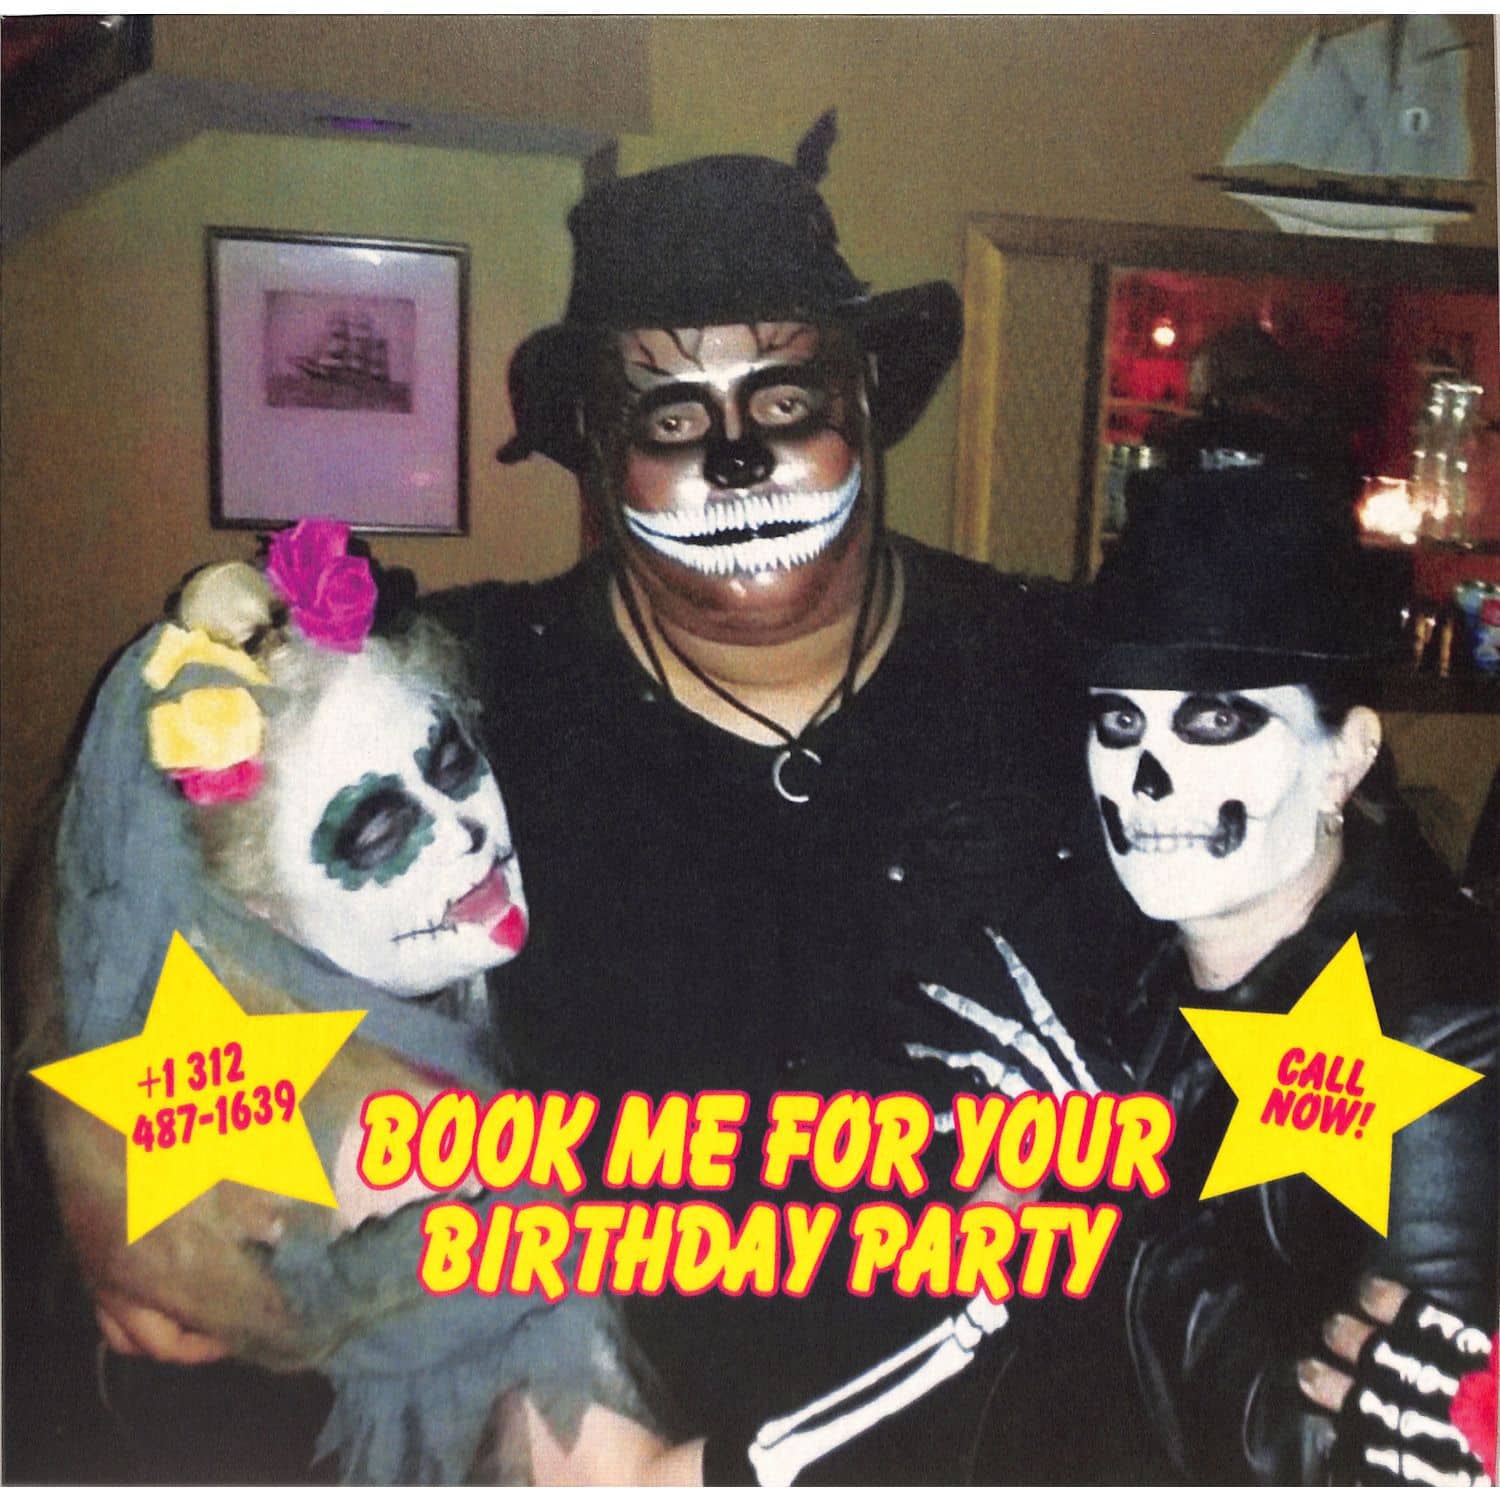 Mark Grusane - BOOK ME FOR YOUR BIRTHDAY PARTY